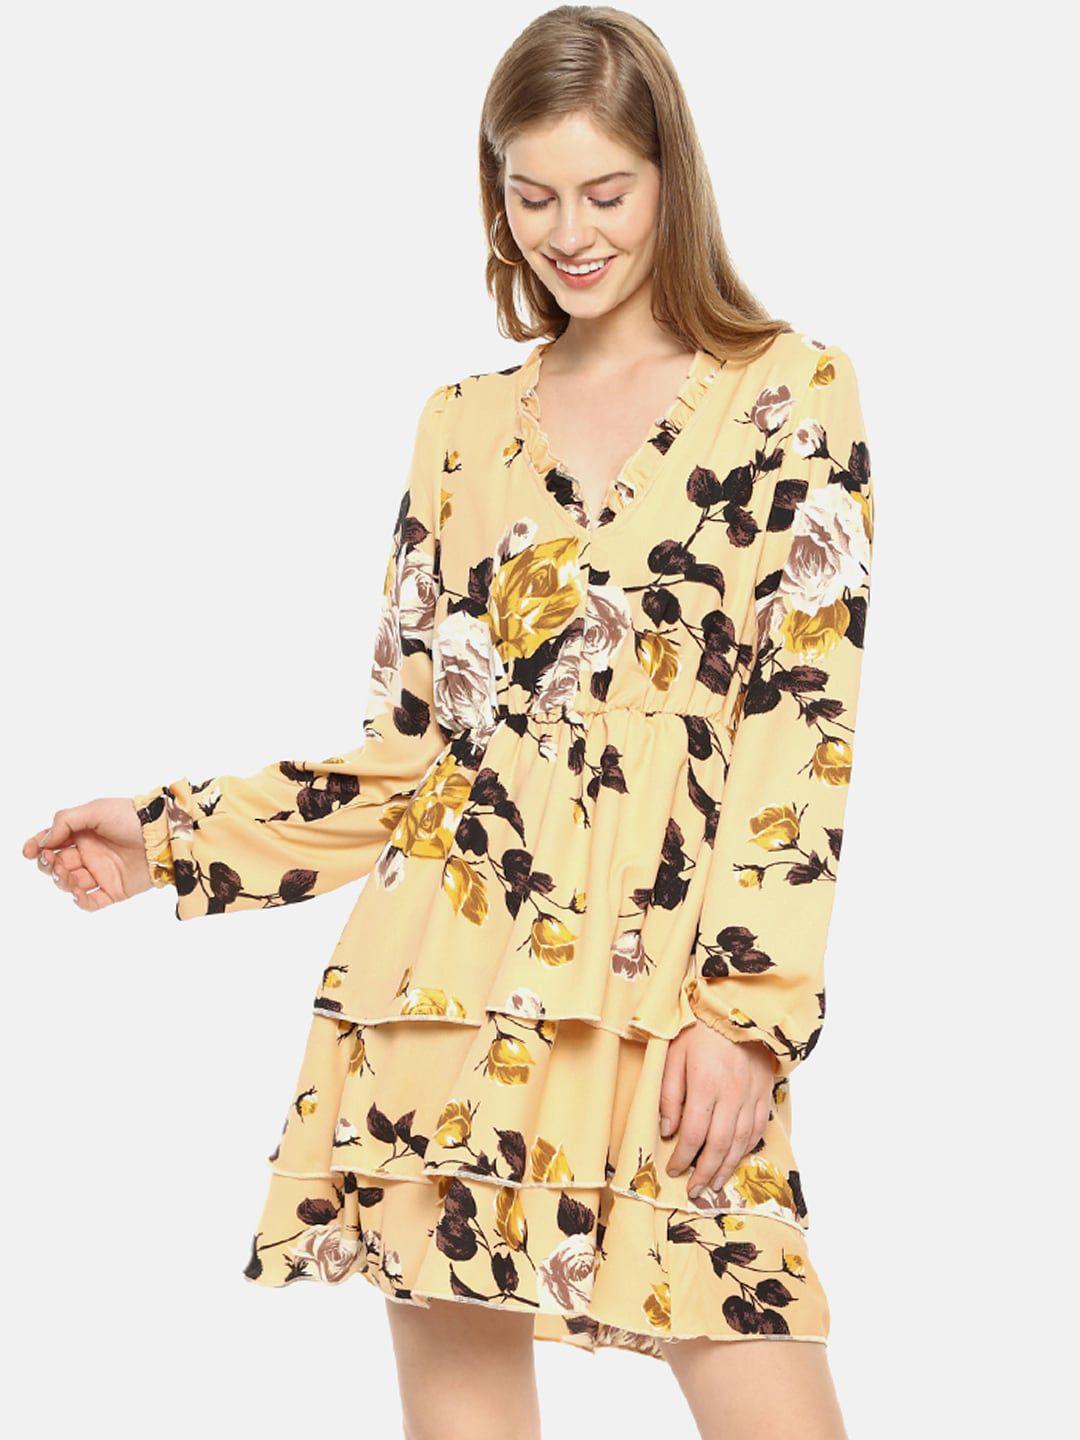 campus sutra mustard yellow floral dress